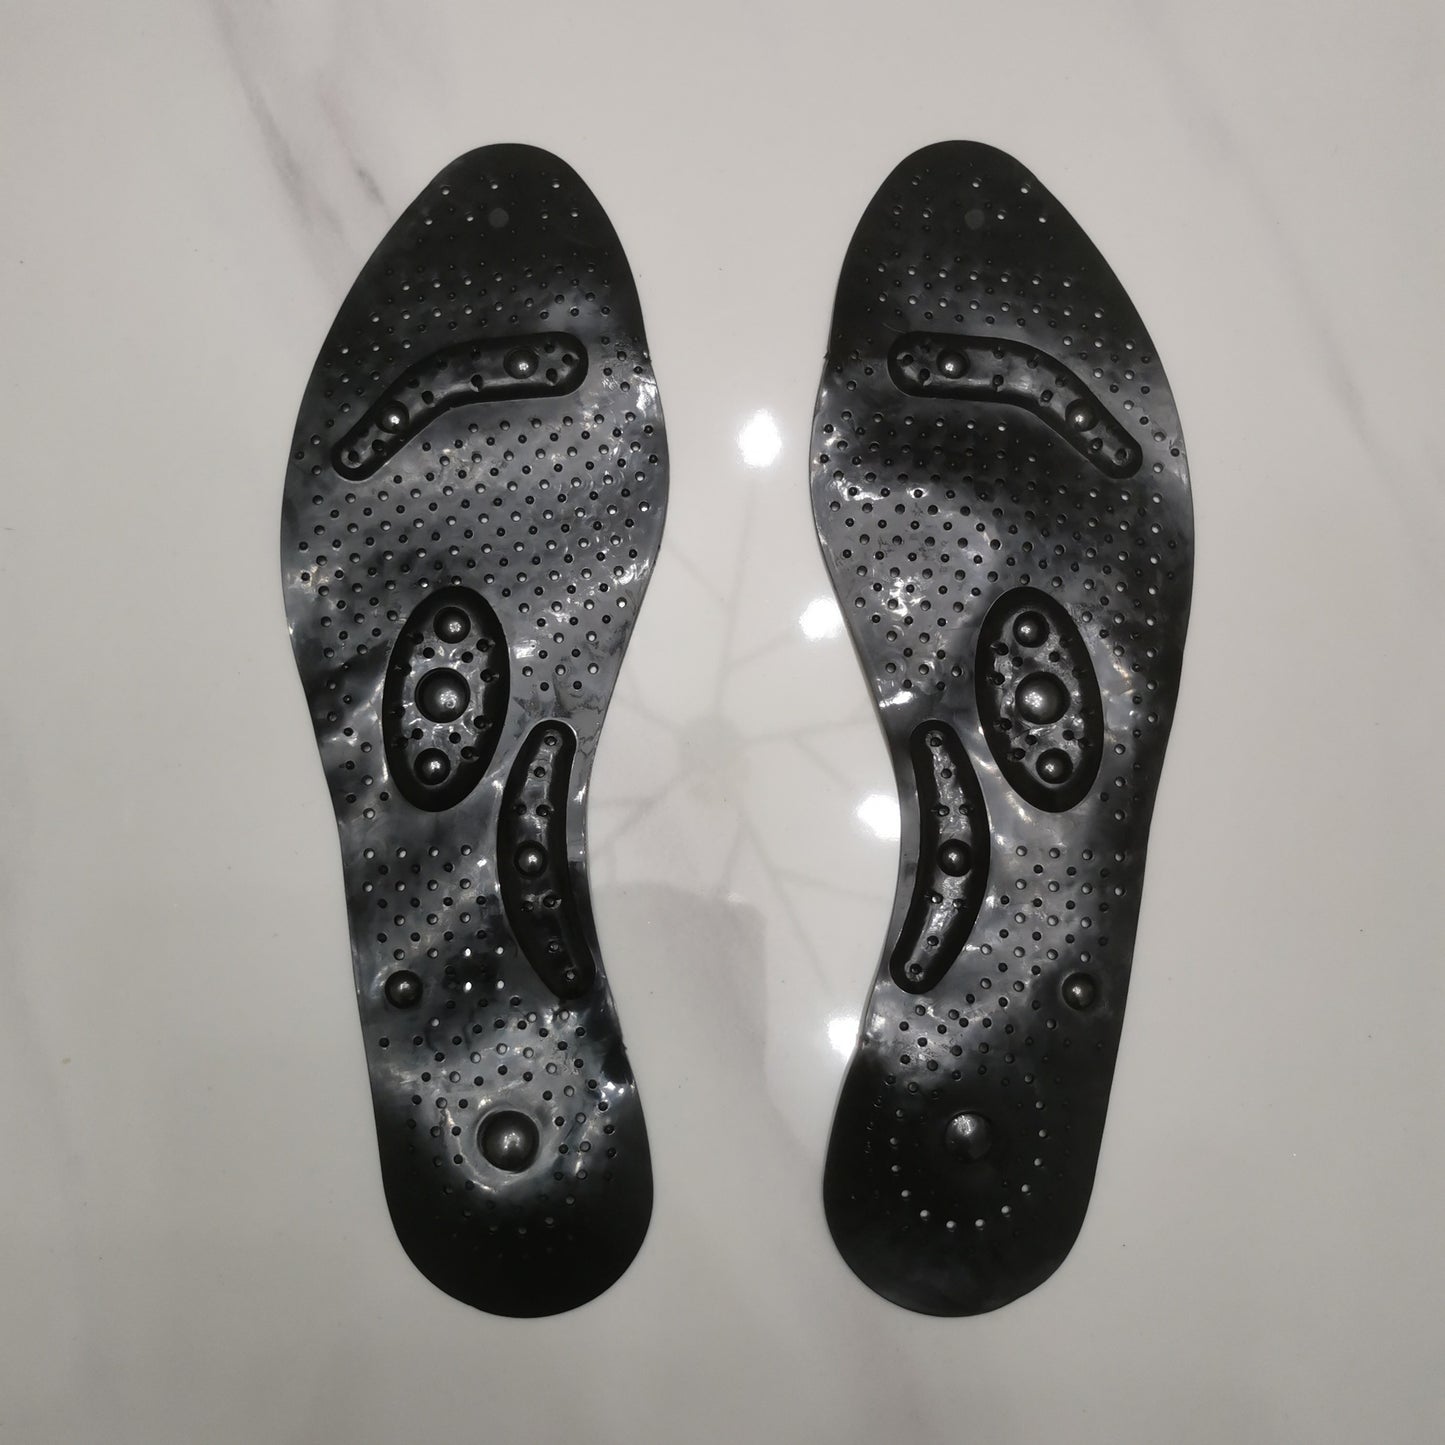 Transparent magnetic therapy insole with 8 magnets